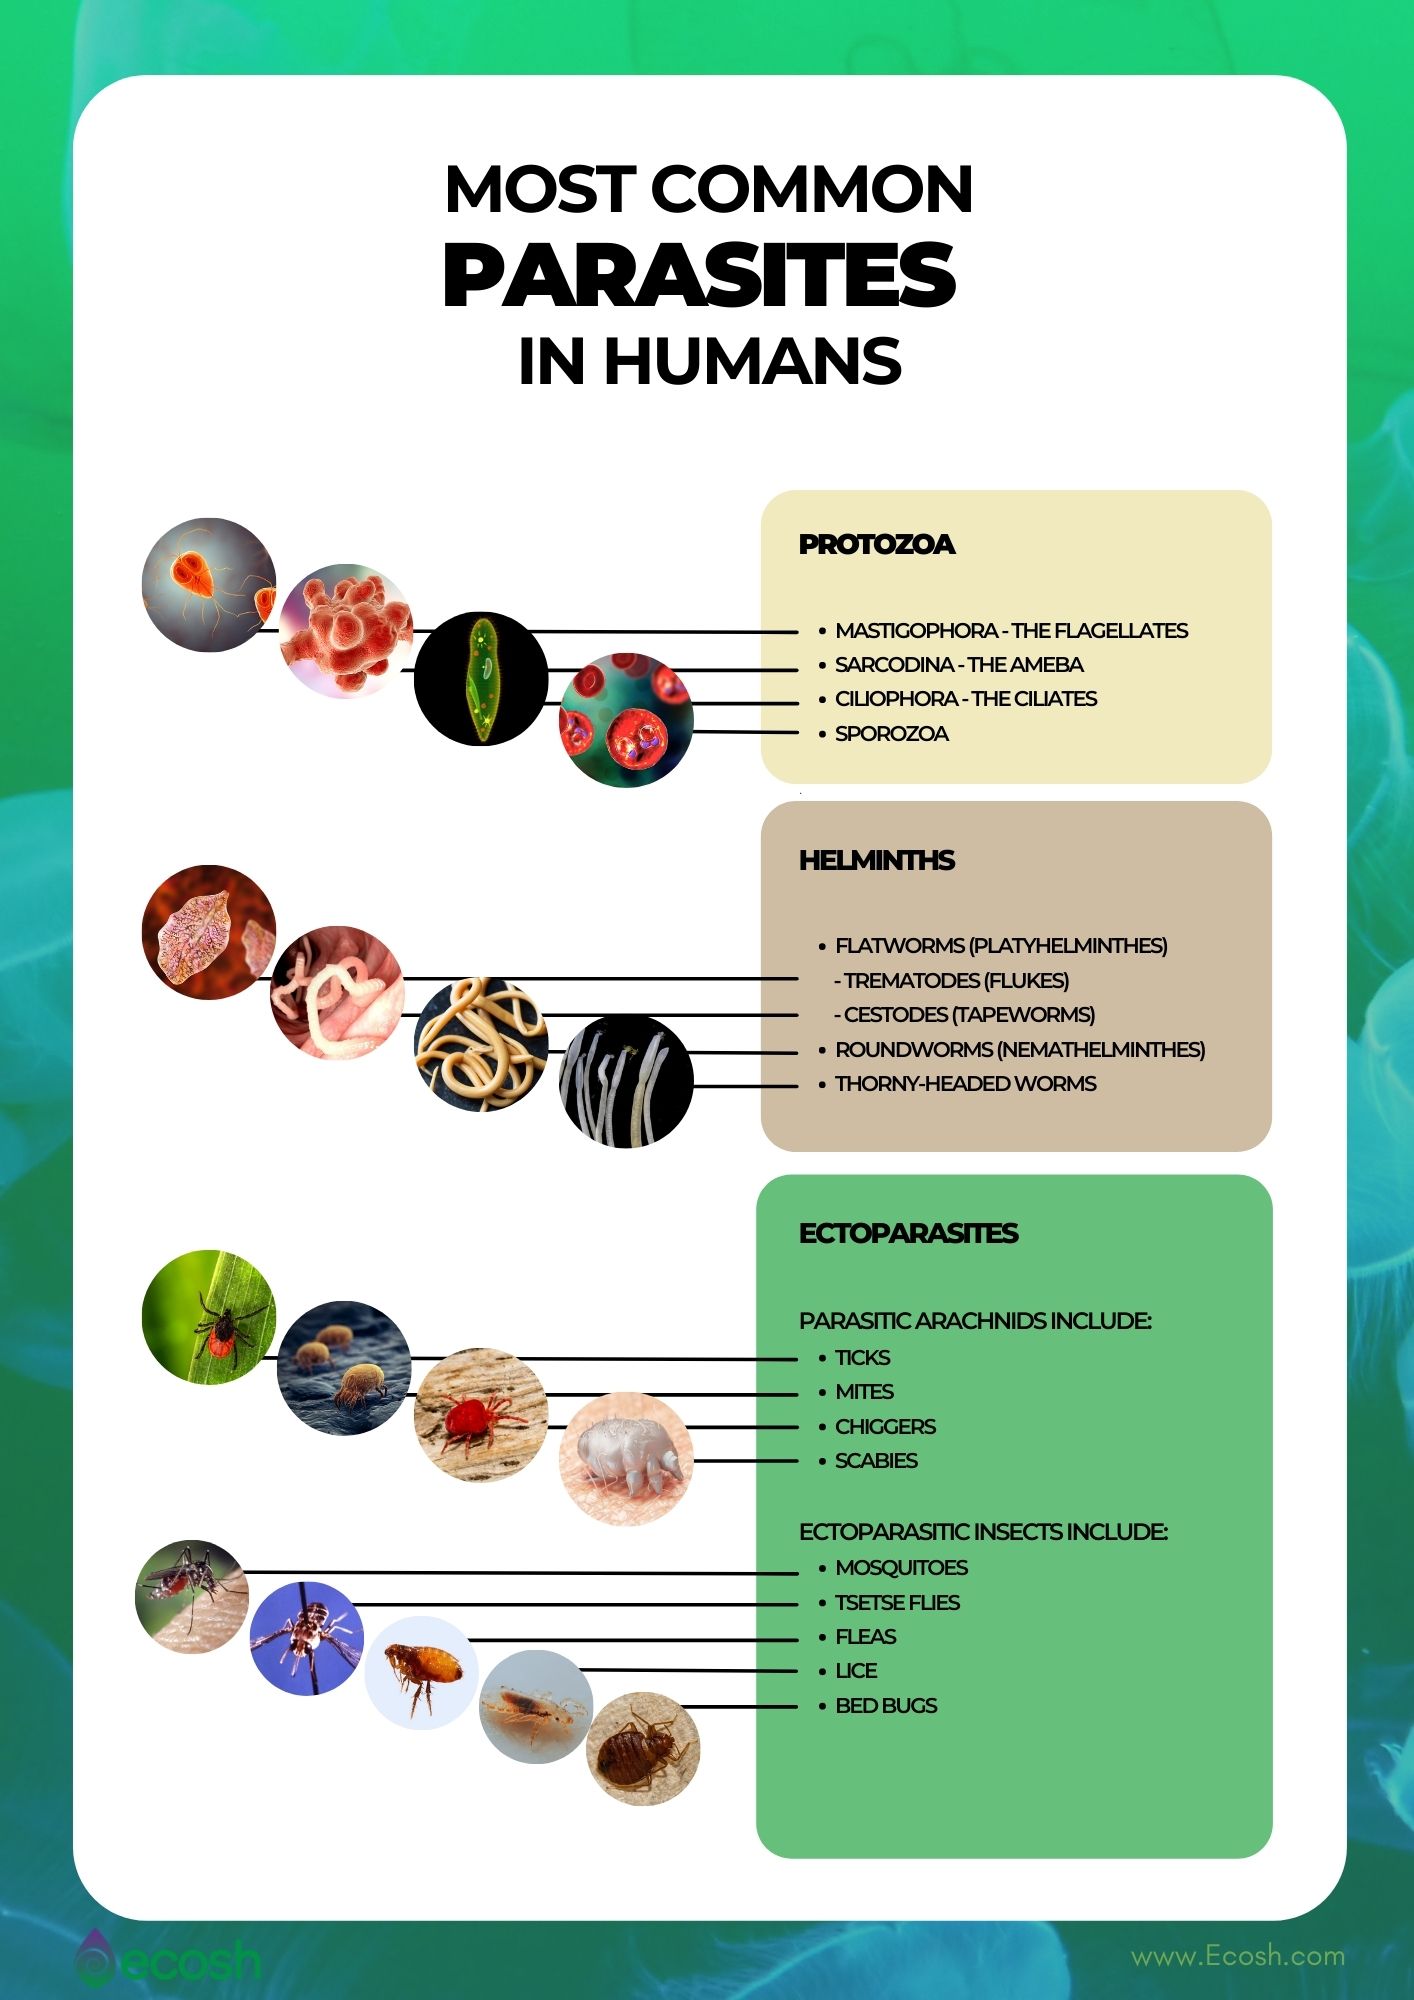 PARASITES - The Full List of Most Common Parasites That Can Live In Human  Body - Ecosh